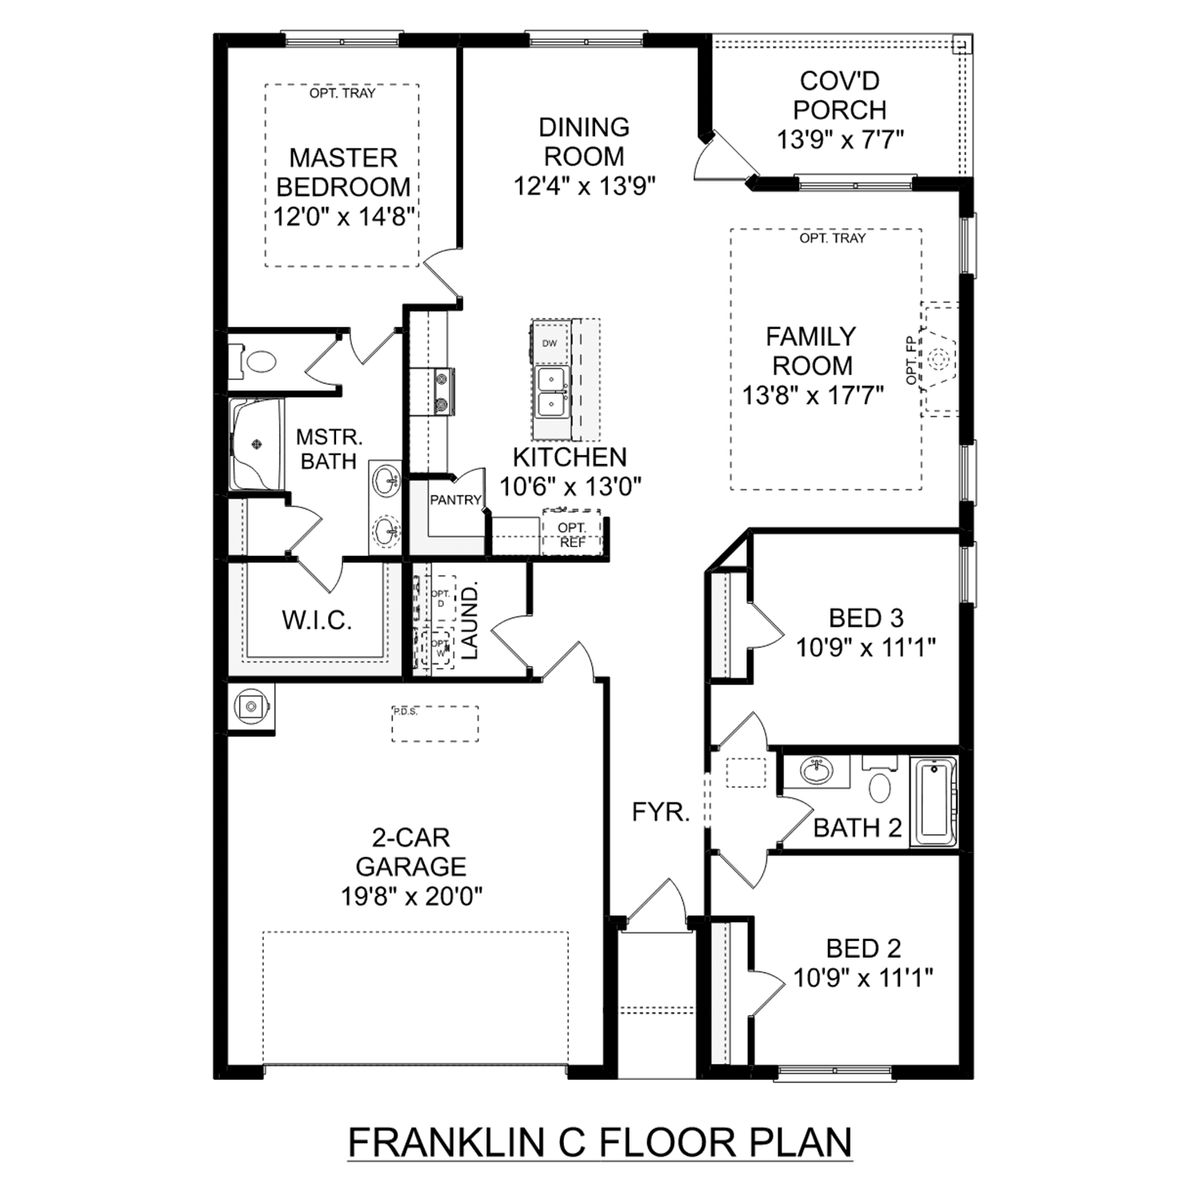 1 - The Franklin C floor plan layout for 138 Hazel Pine Trail in Davidson Homes' Clearview community.